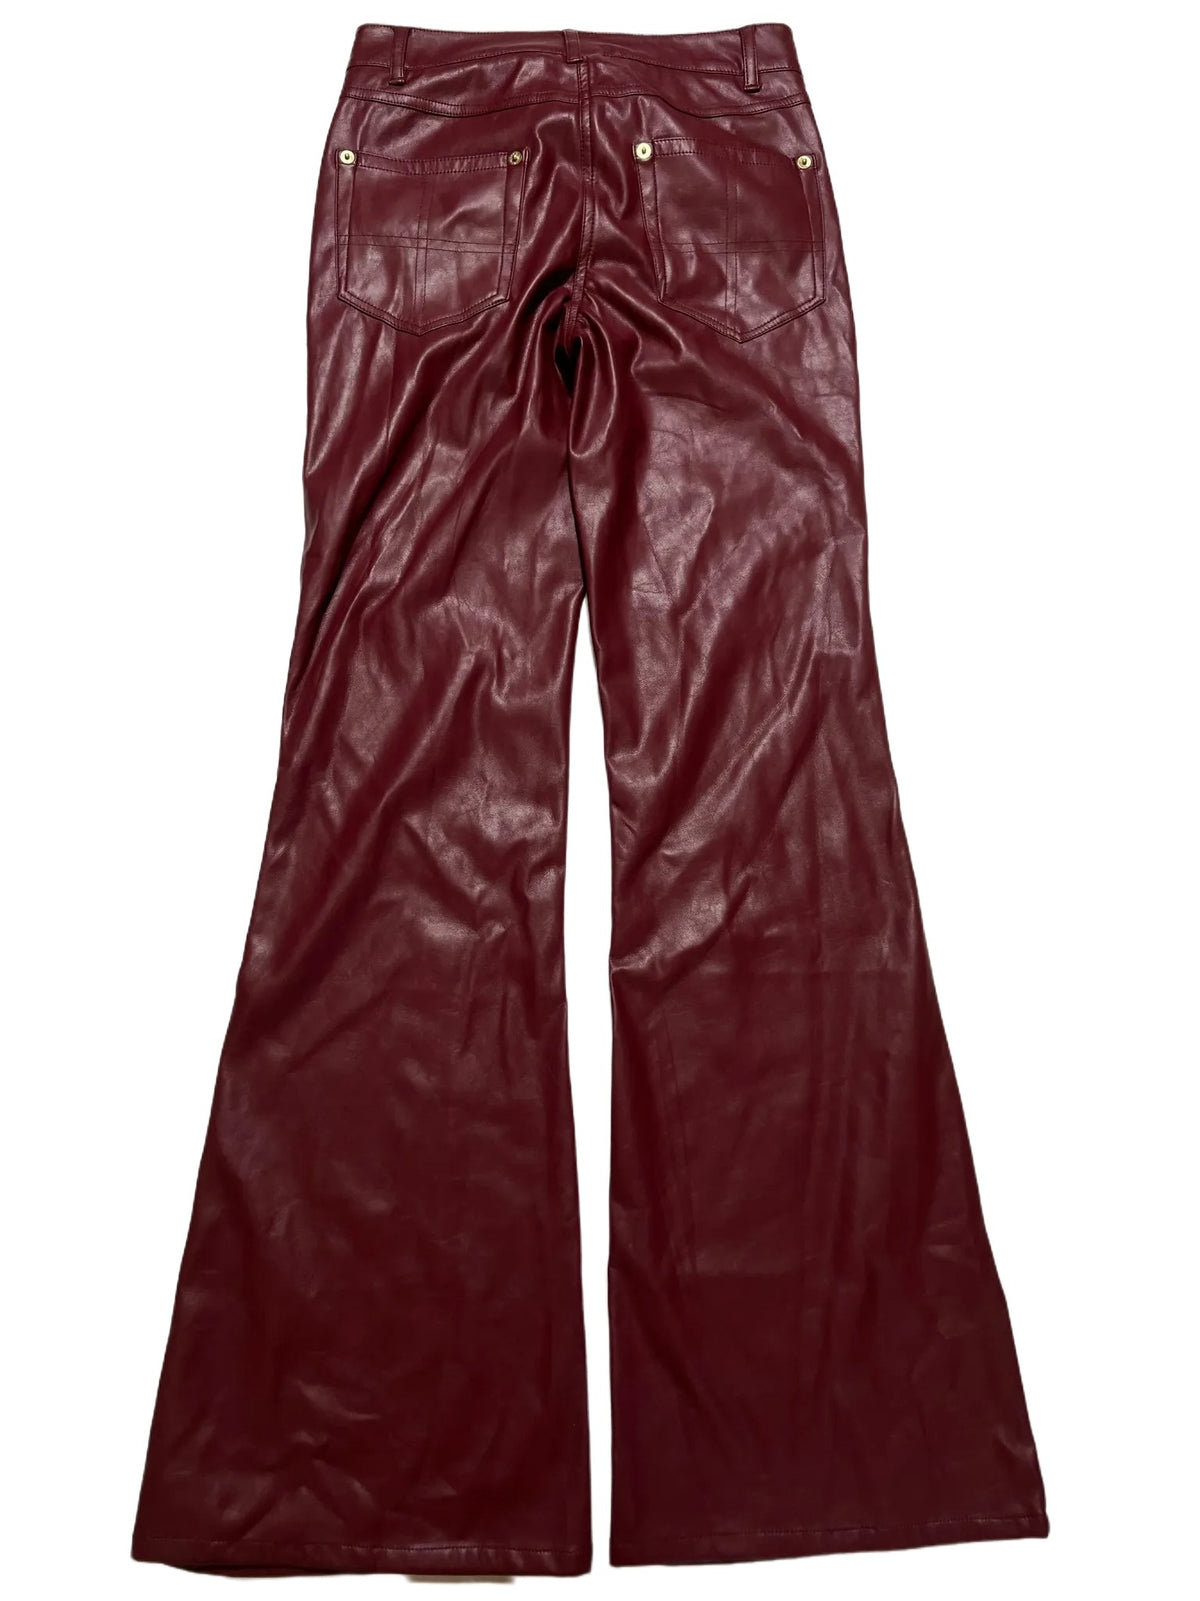 JGR & STN- Red Leather Pants